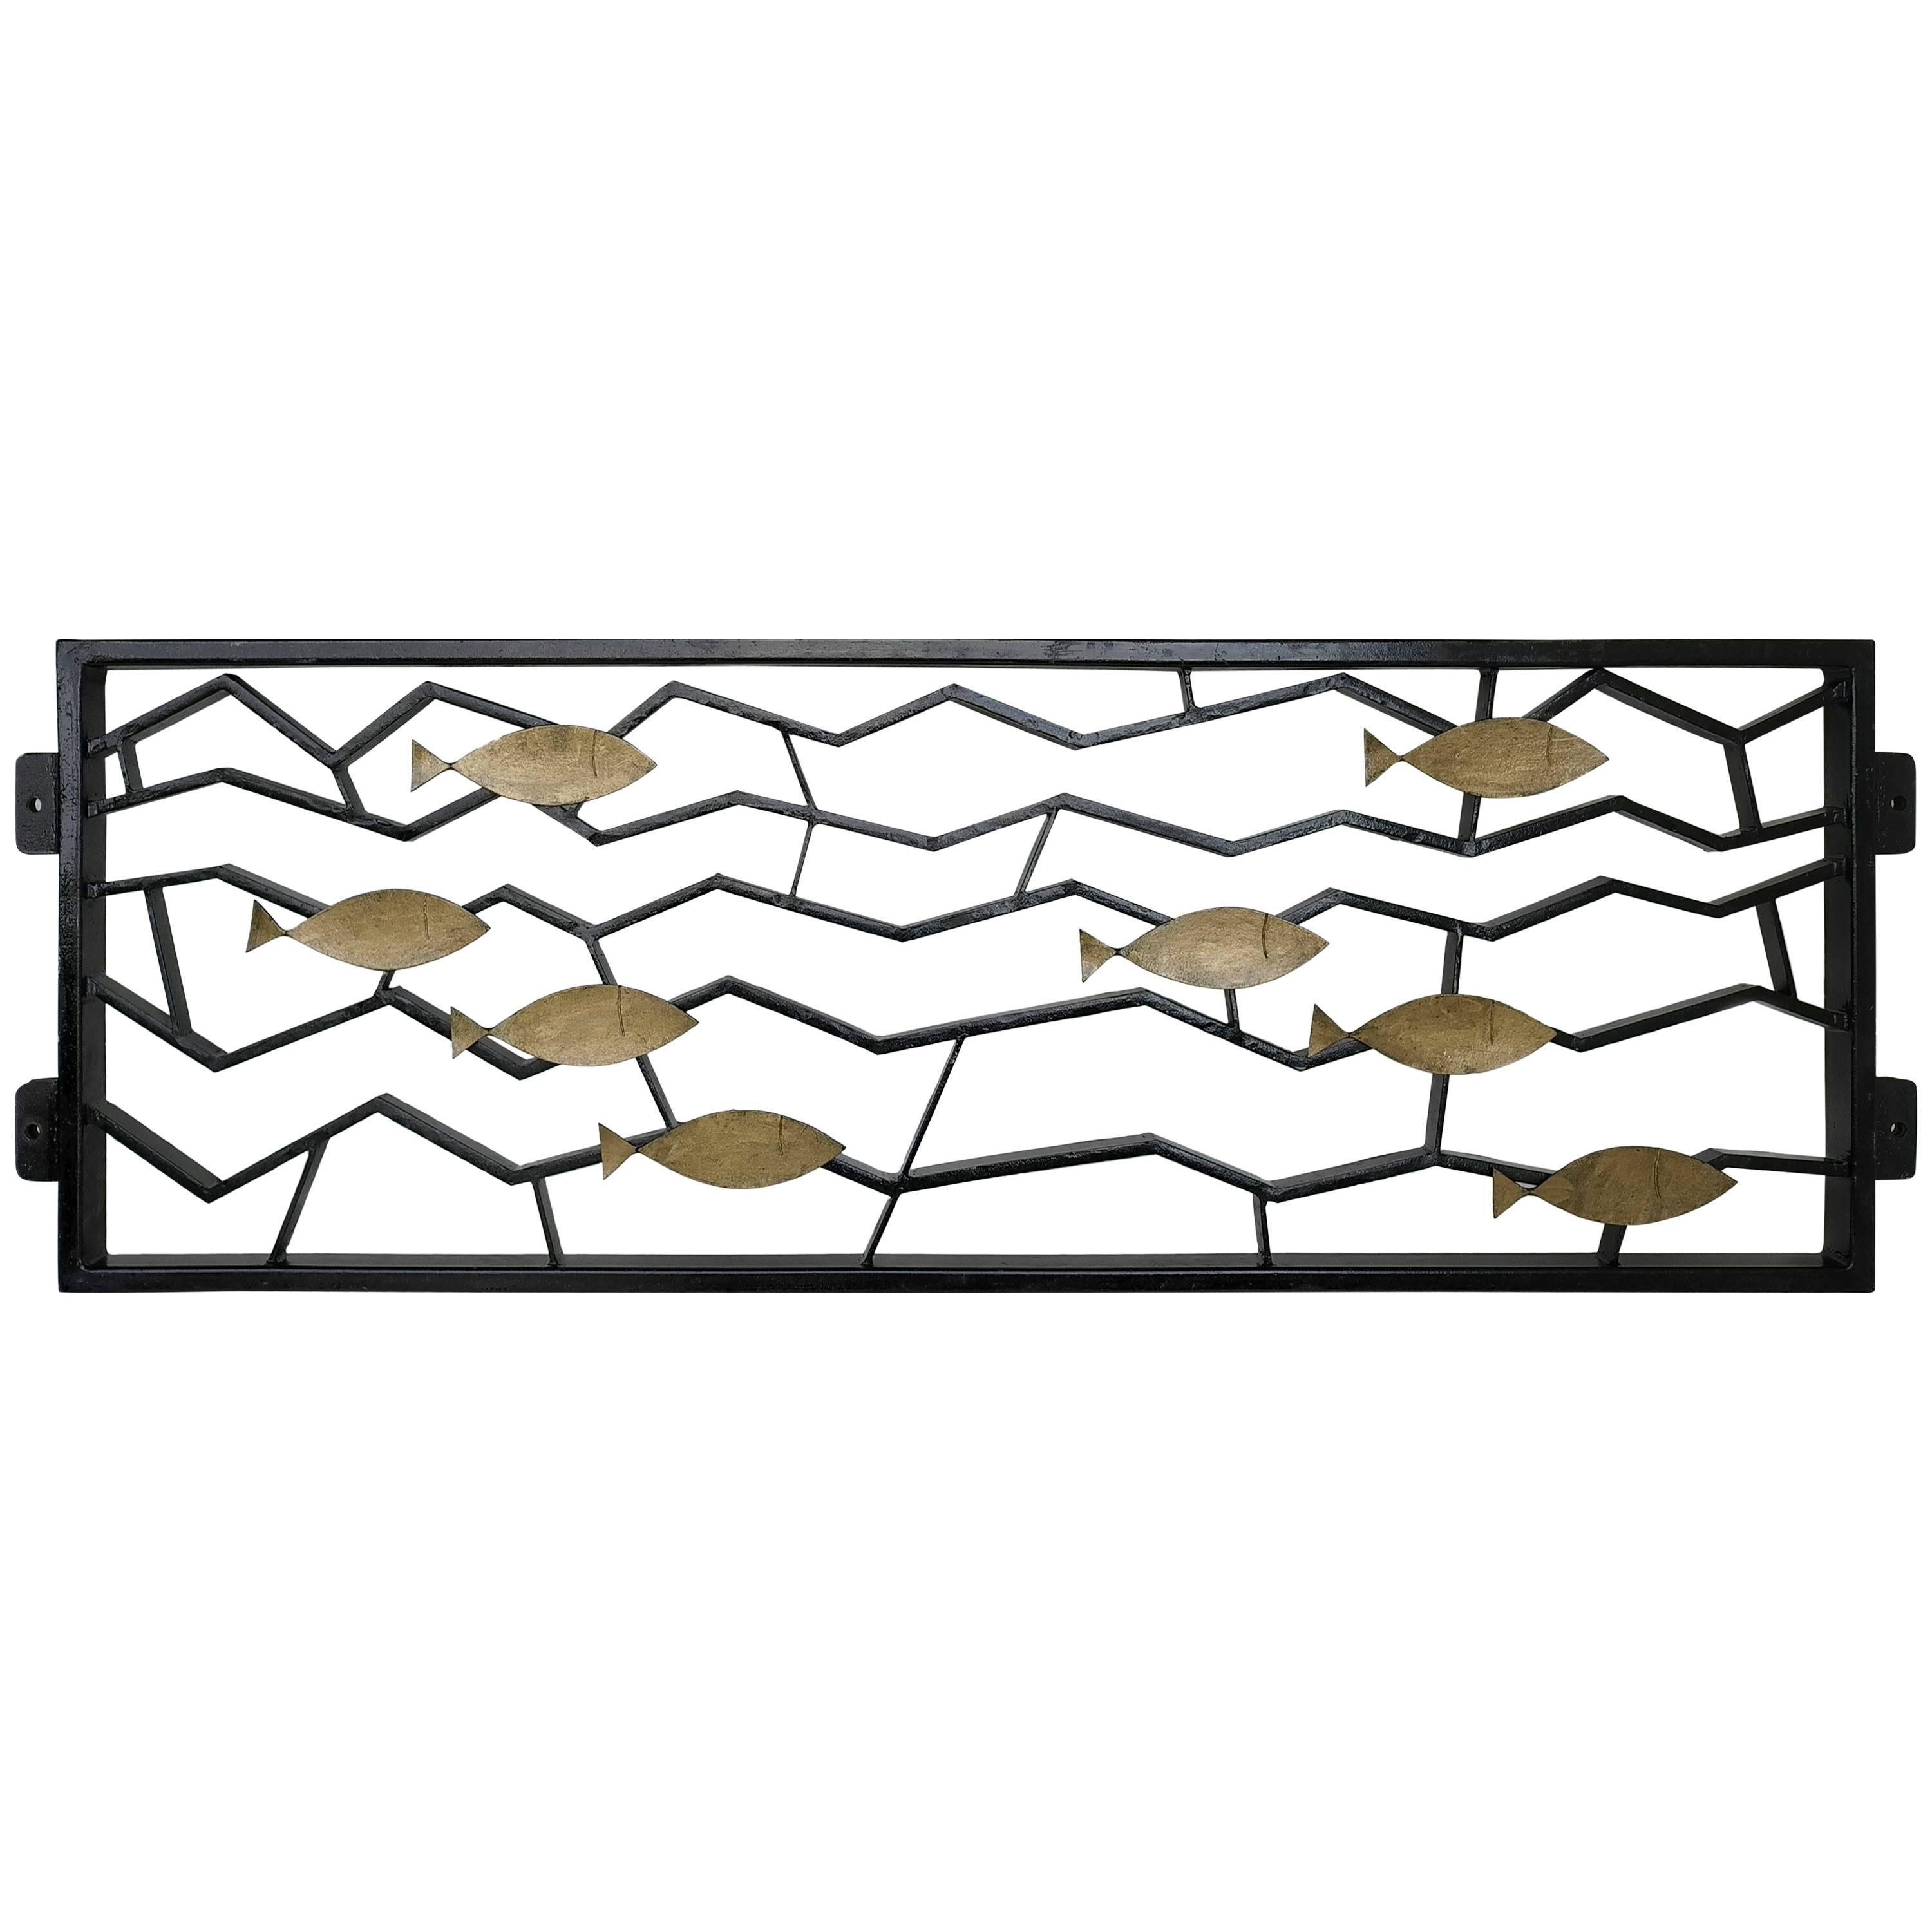 Pair of Metal Geometric Fence or Art Object with Golden Fish